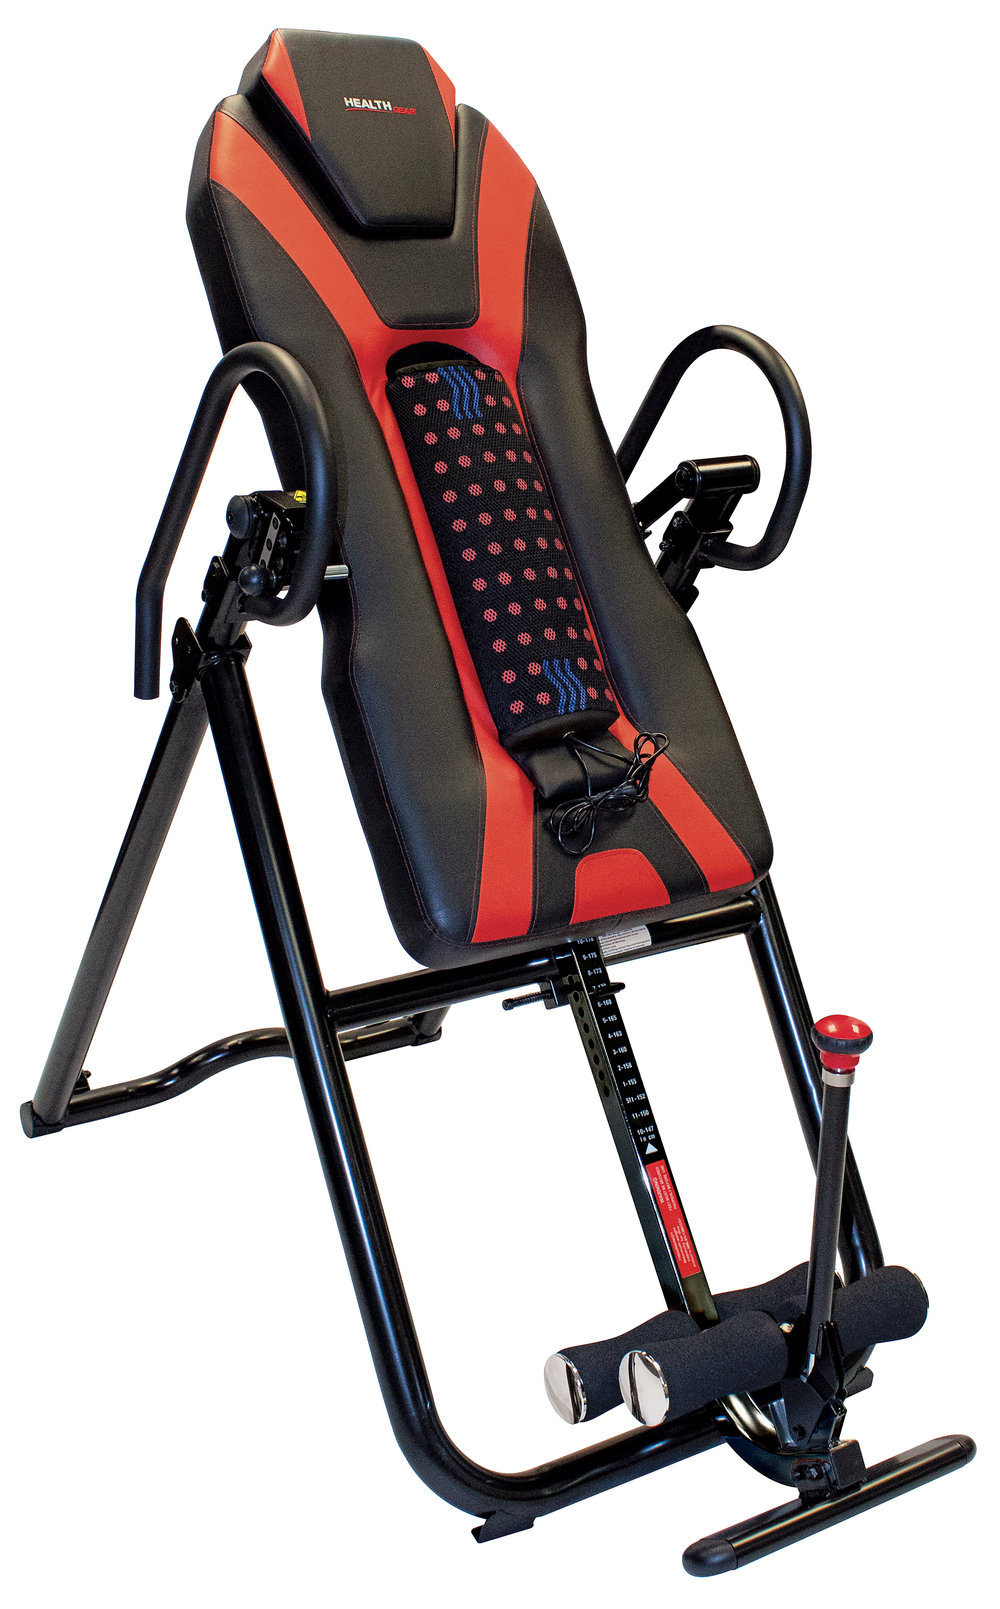 Health Gear Hgi 69 Full Back Heat And Massage Inversion Table Extreme Products Group Extreme Products Group